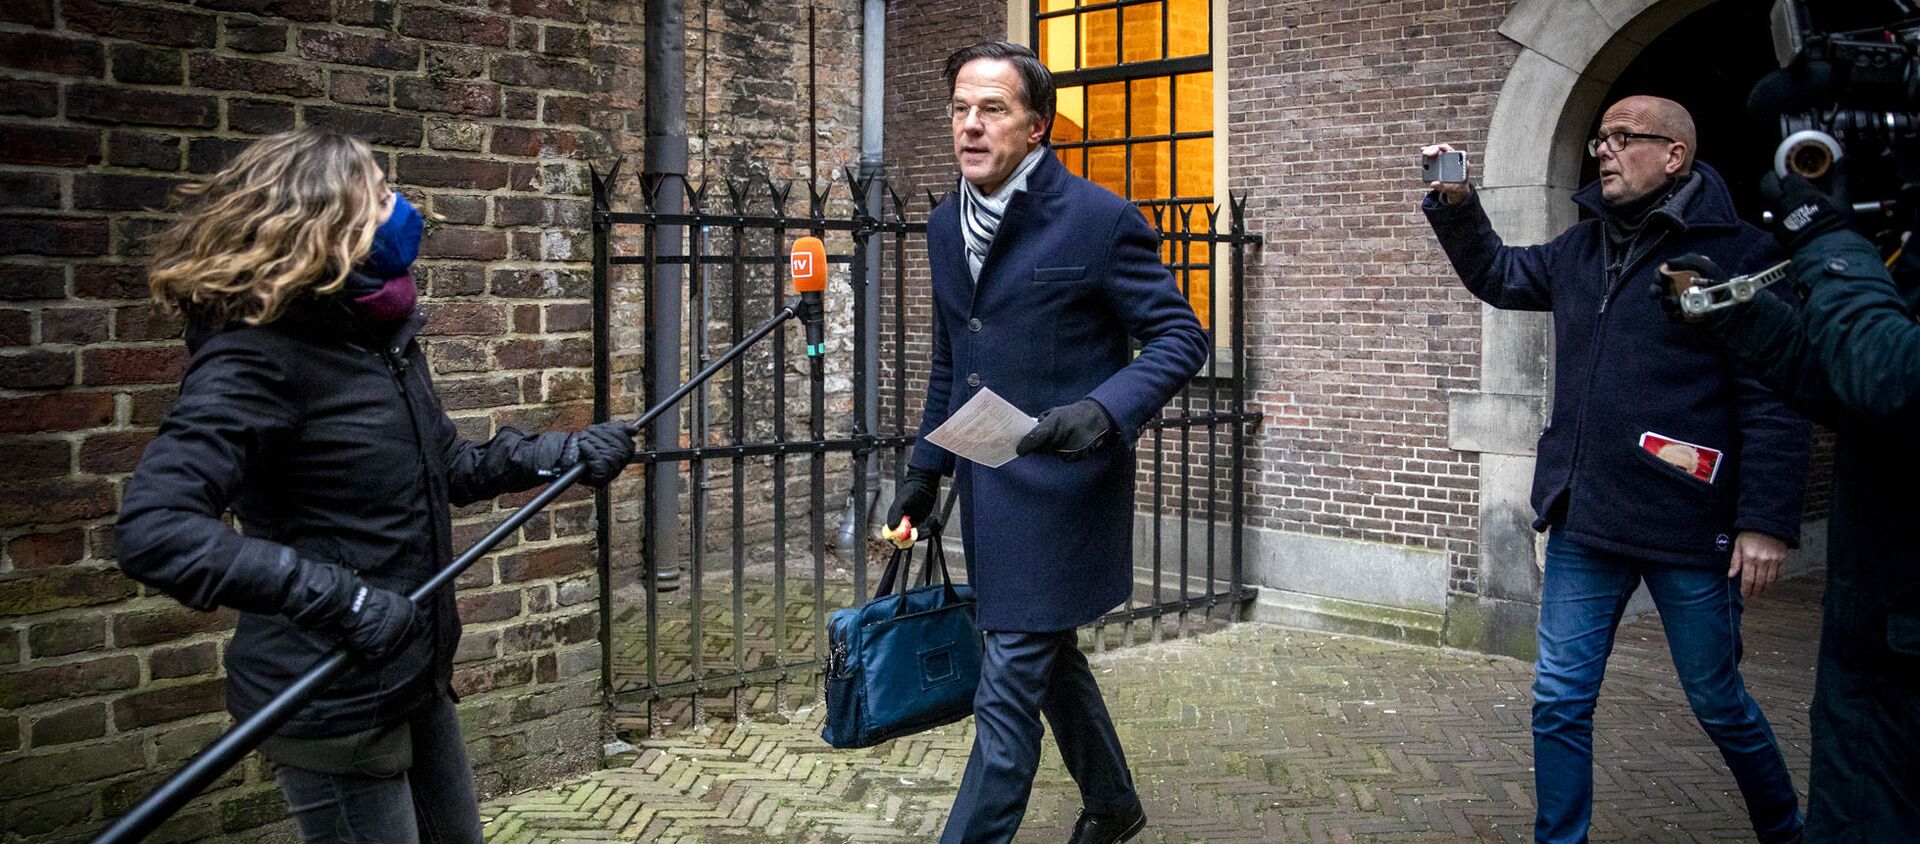 Dutch Prime Minister Mark Rutte is surrounded by the press as he arrives before the Council of Ministers at the Binnenhof in The Hague on January 15, 2021, where the ministers are meeting to discuss the political consequences of the benefits affair. - Sputnik International, 1920, 15.01.2021